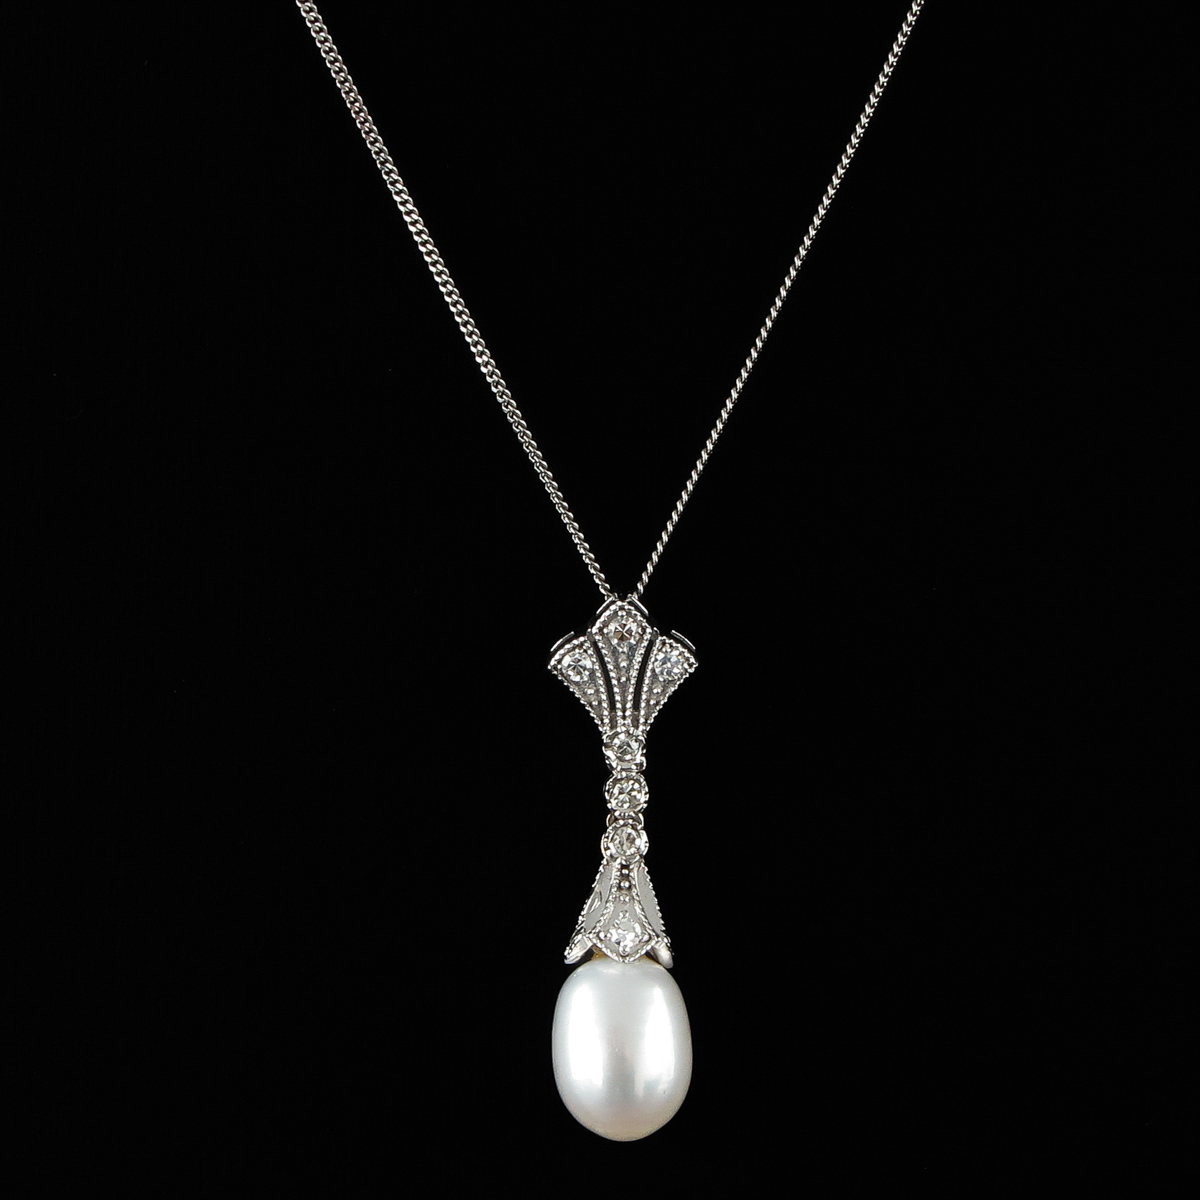 A Necklace with Pearl and Diamond Pendant